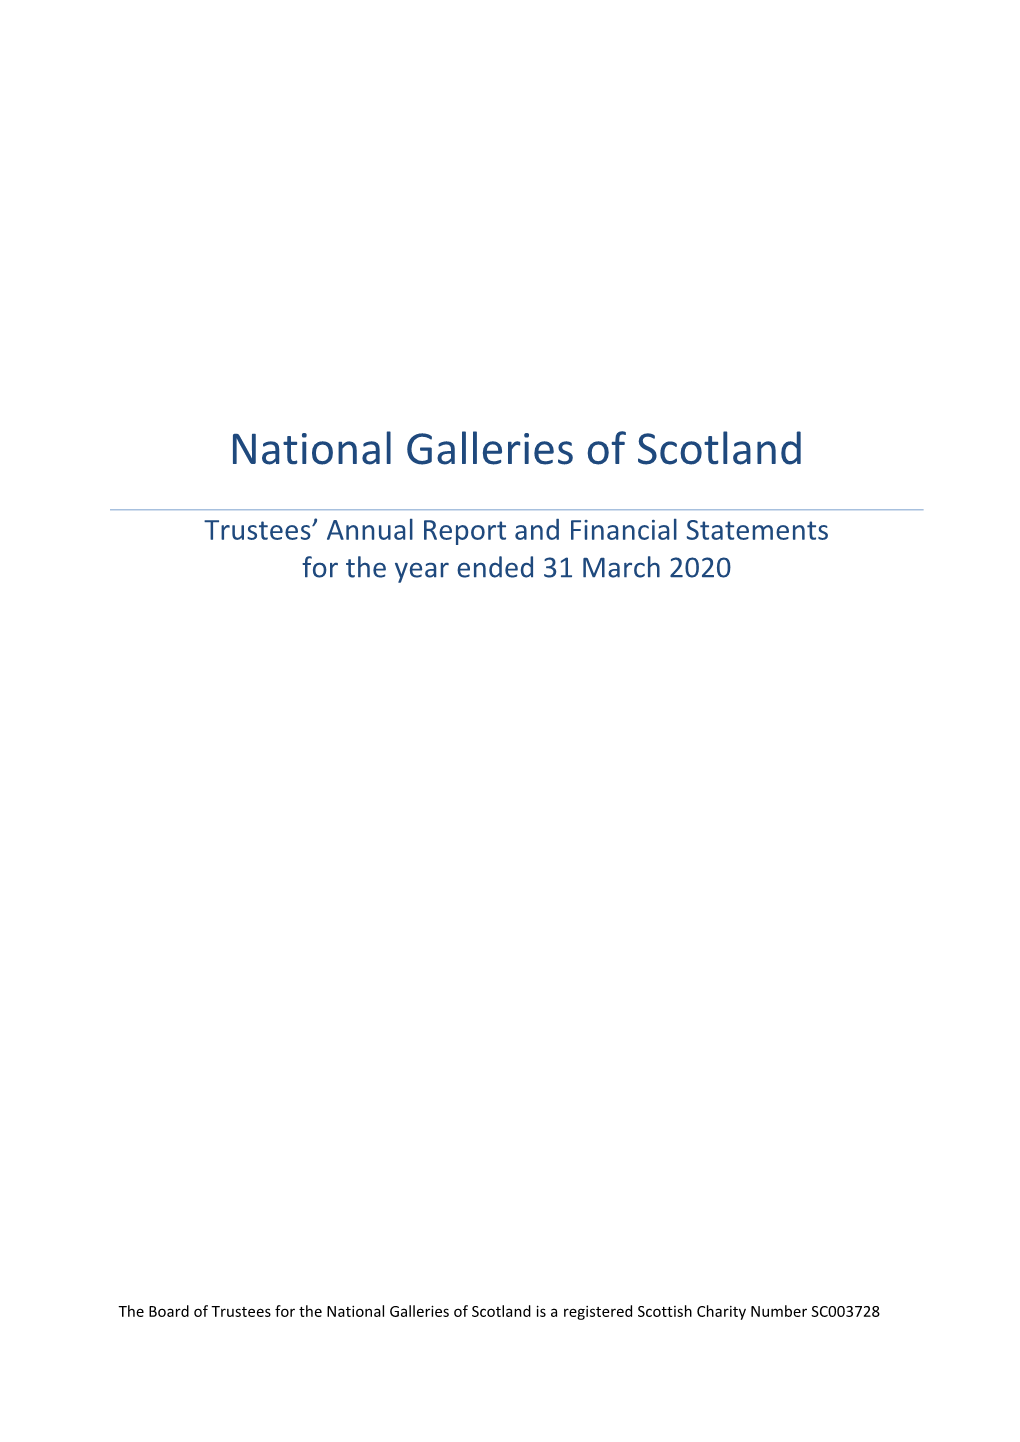 Annual Report and Financial Statements 2019-20